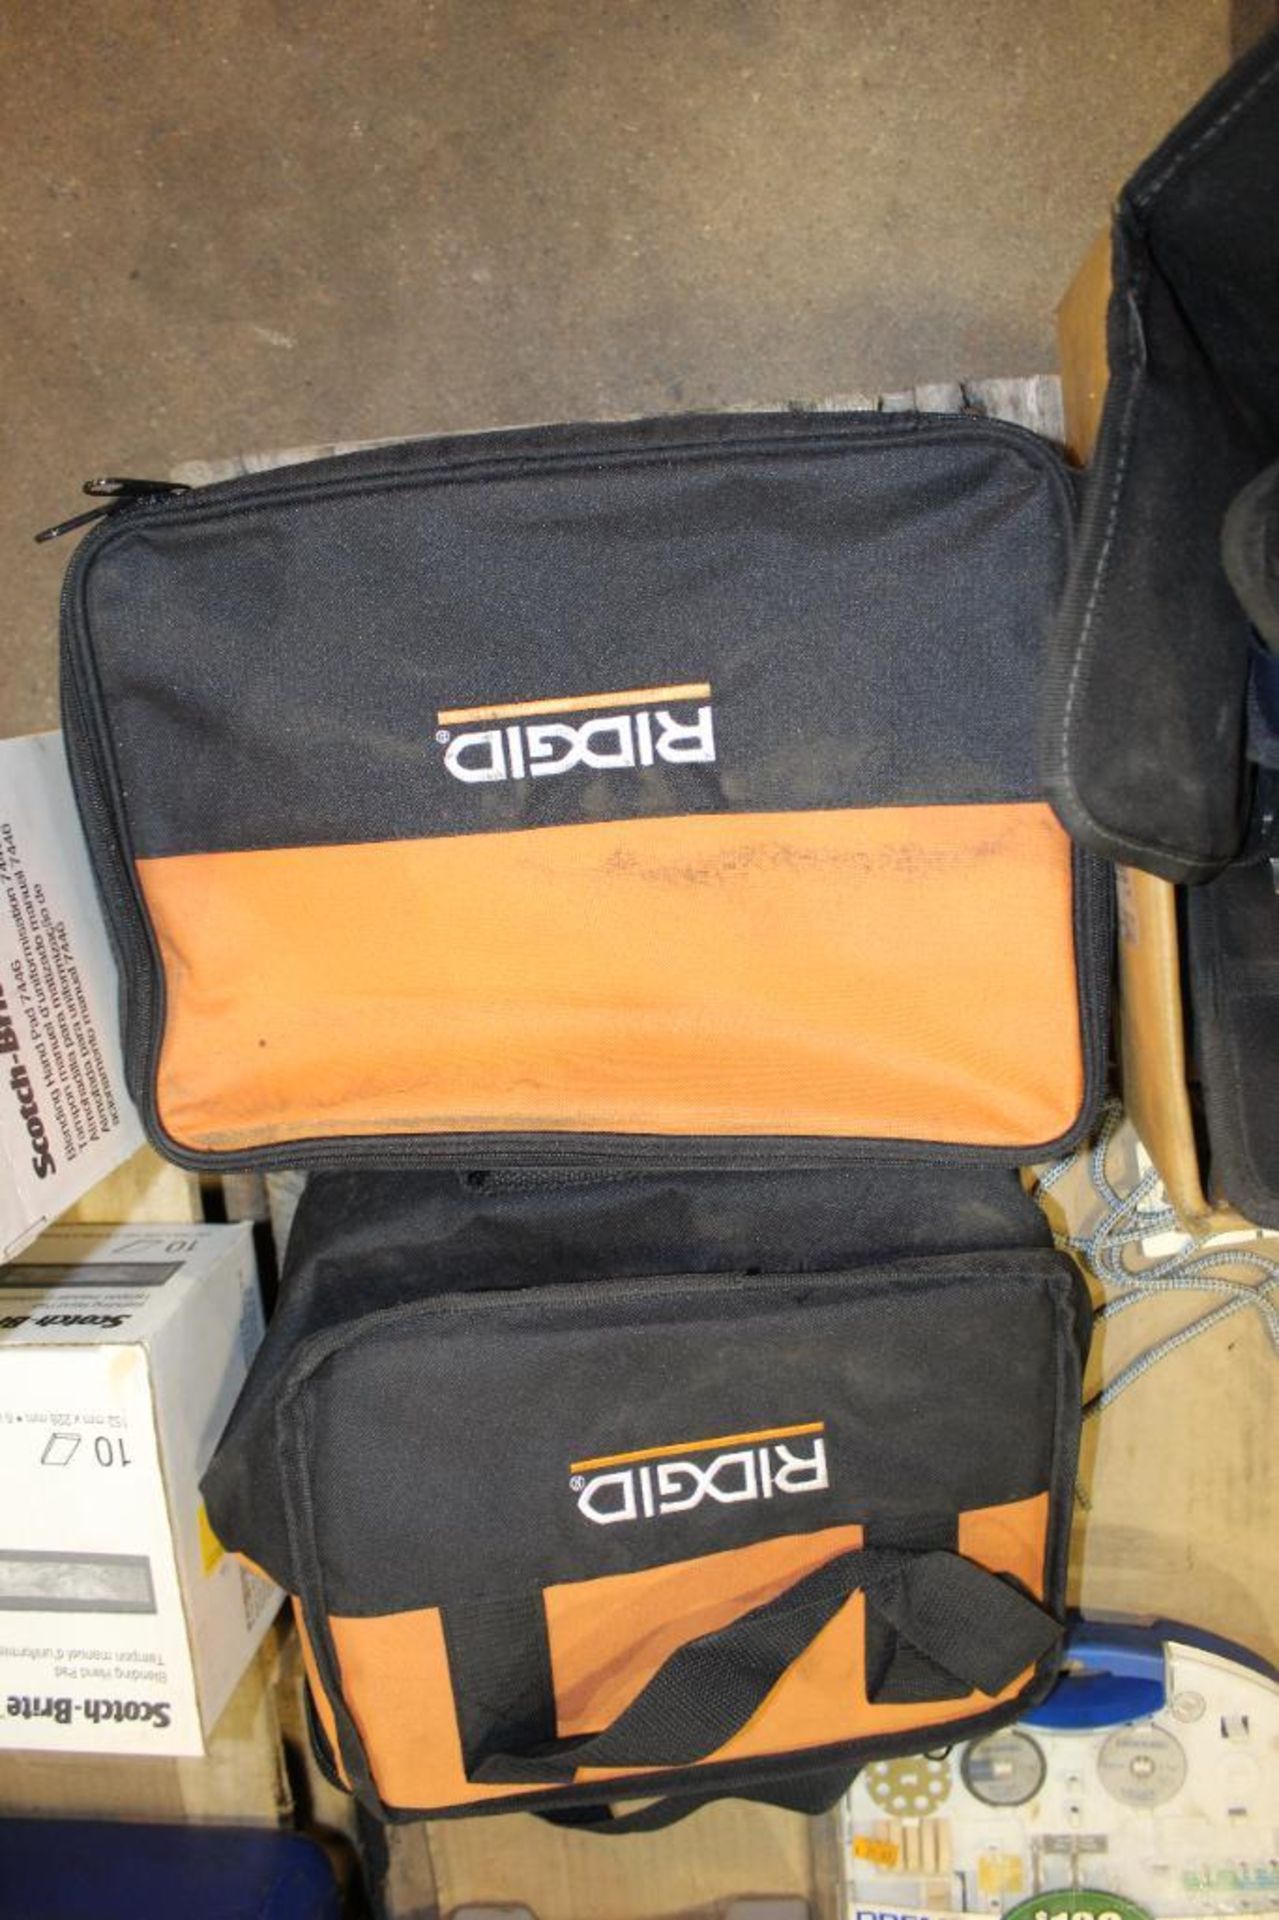 Lot of Ridgid Canvas Bags/Assorted Tool Holders, DeWalt Hardcase with (2) Battery Chargers, Ridgid A - Image 4 of 13